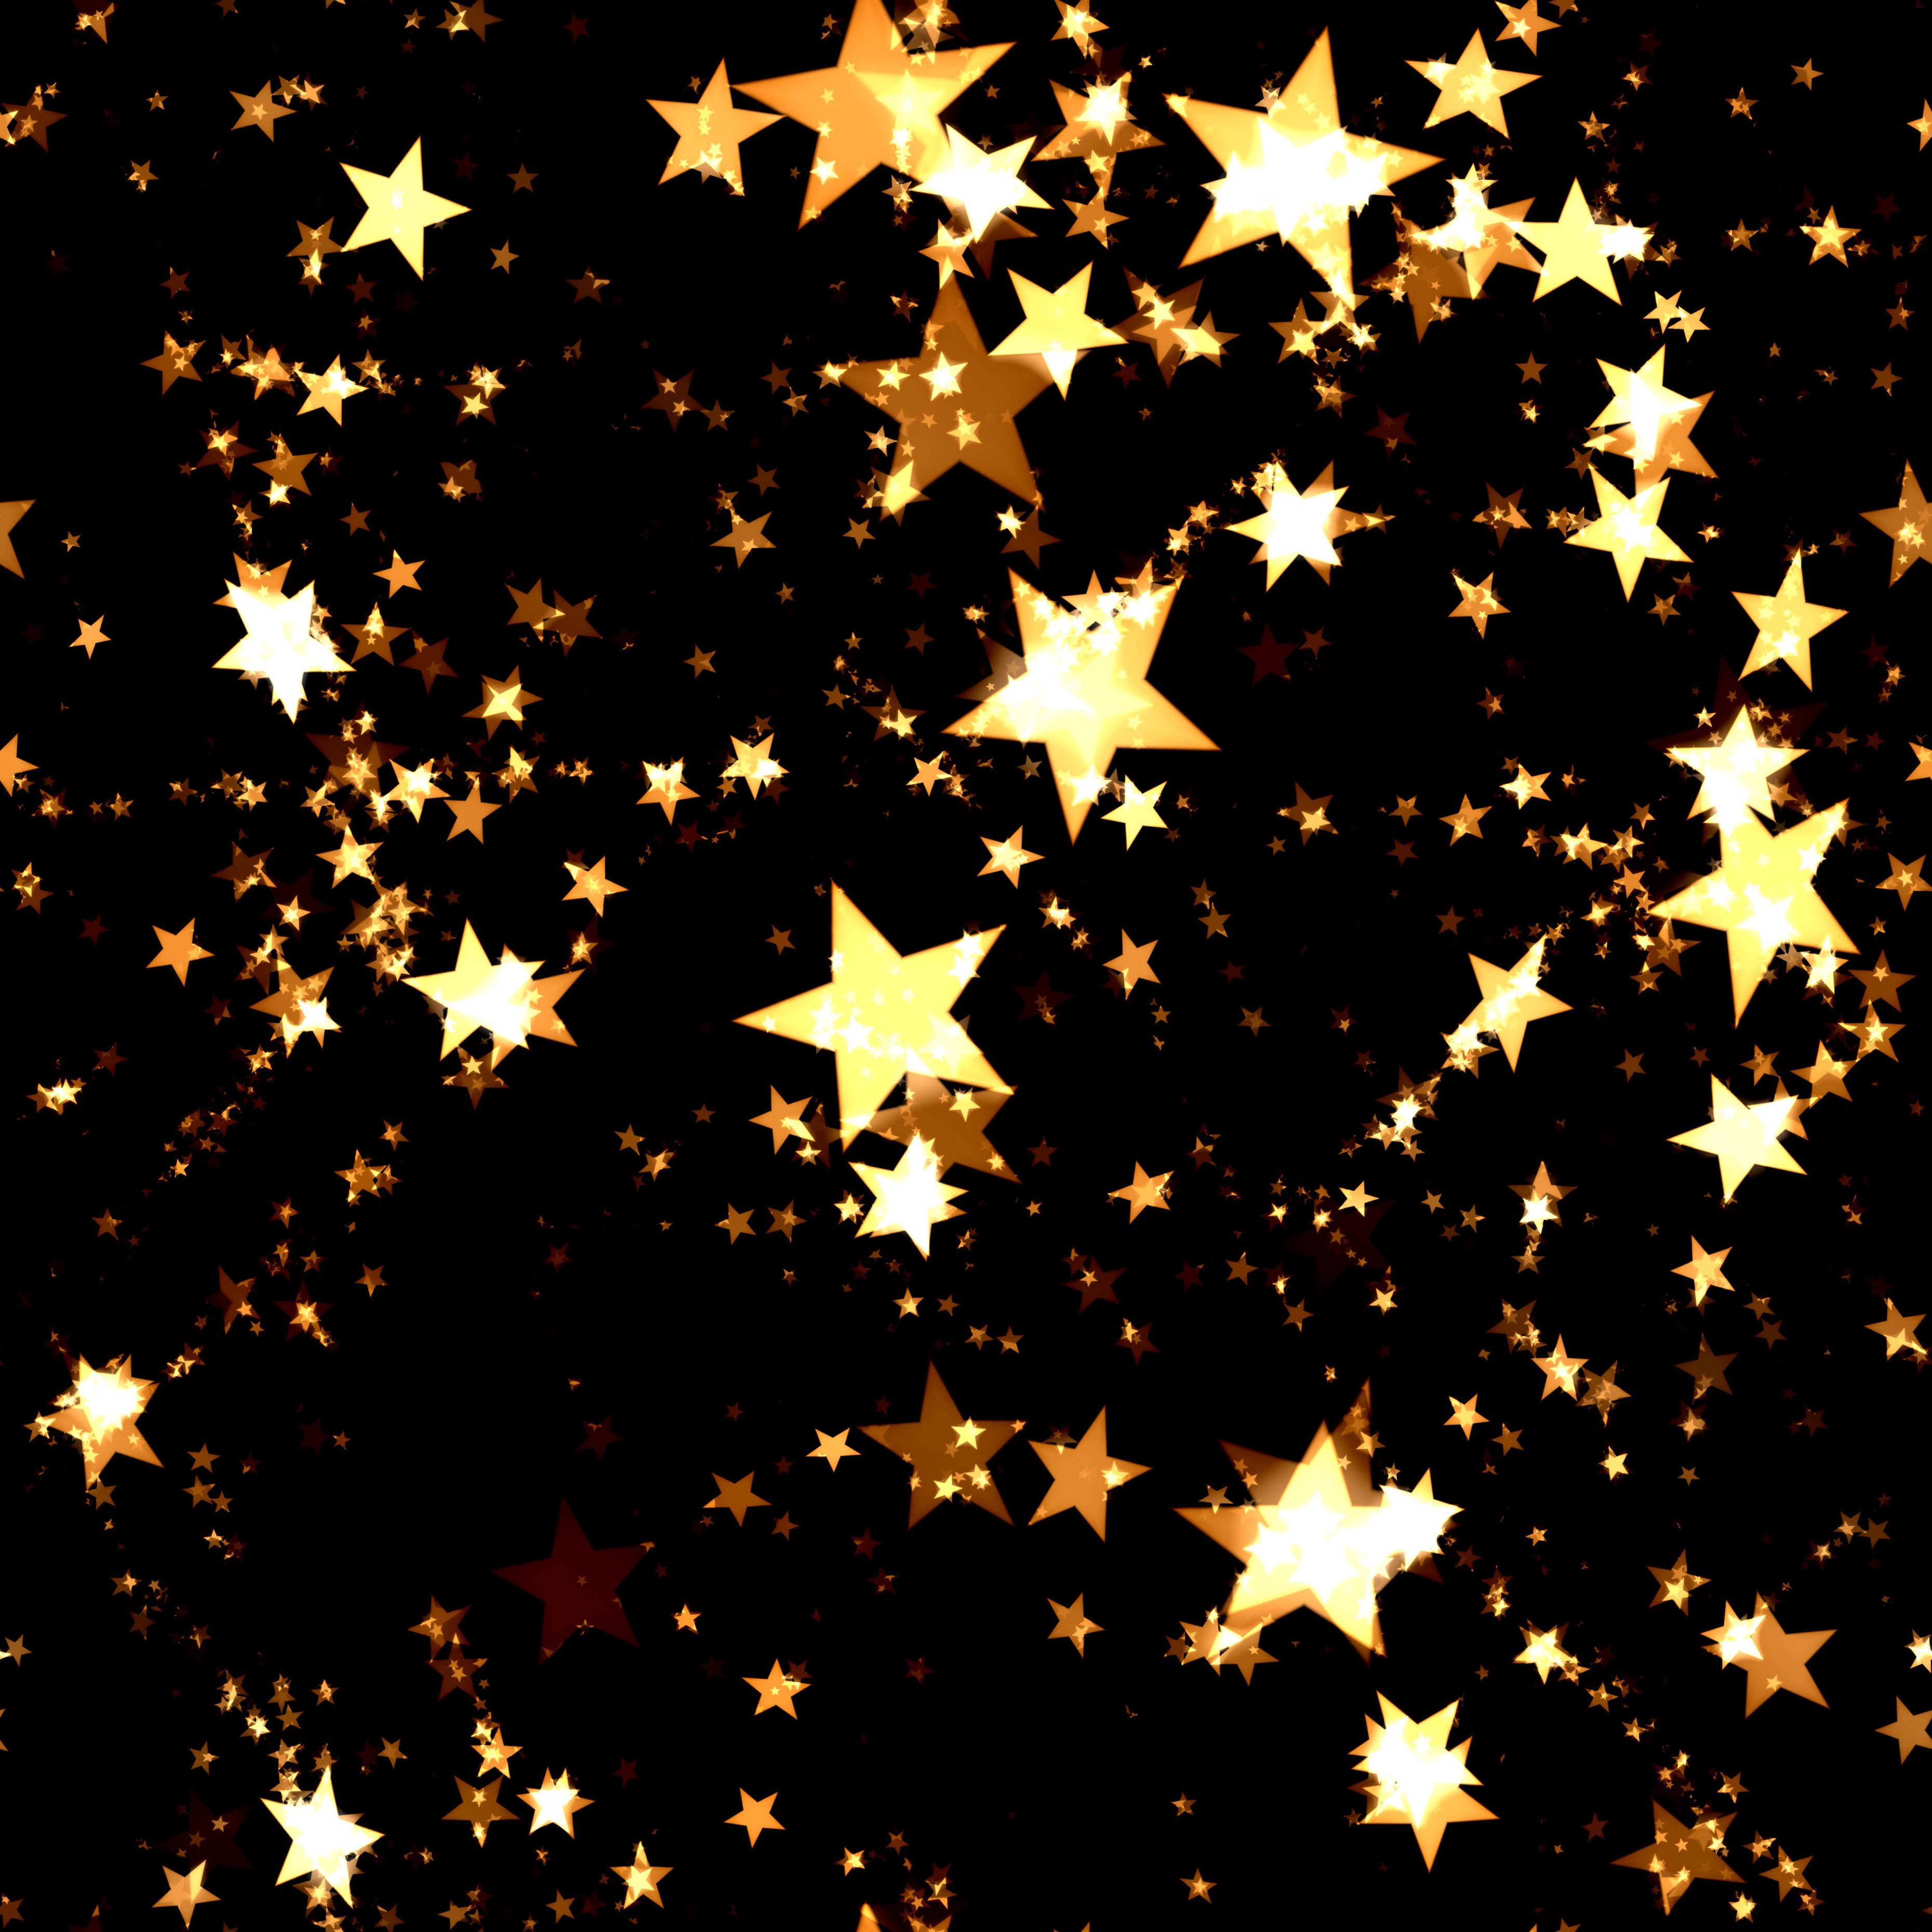 35 Stars at Xmas Background Images Cards or Christmas Wallpapers